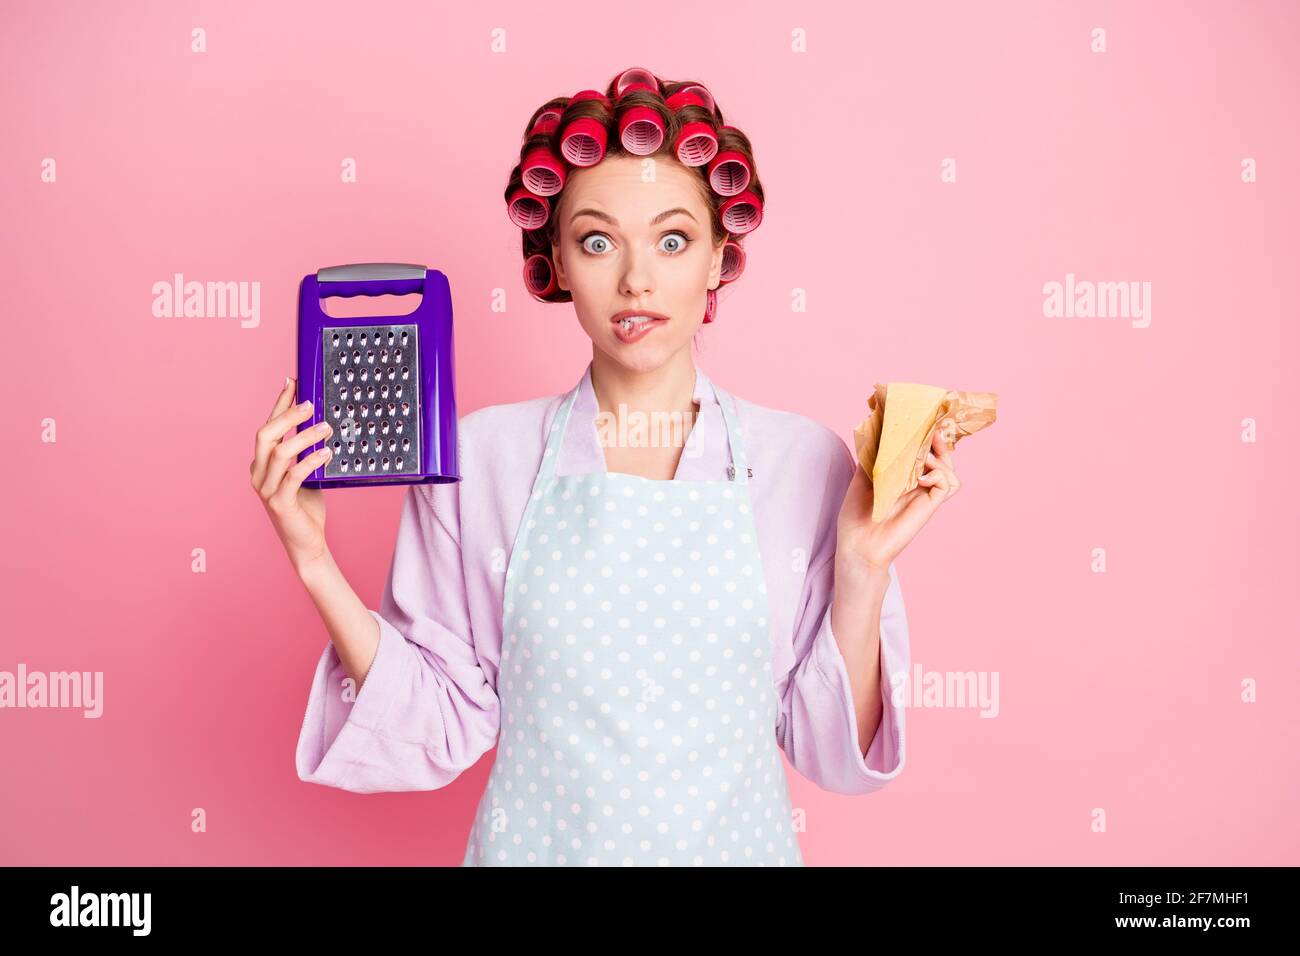 https://c8.alamy.com/comp/2F7MHF1/photo-of-scared-brown-haired-beautiful-wife-hold-cheese-grater-bite-lip-wear-dotted-apron-purple-bathrobe-isolated-on-pink-color-background-2F7MHF1.jpg